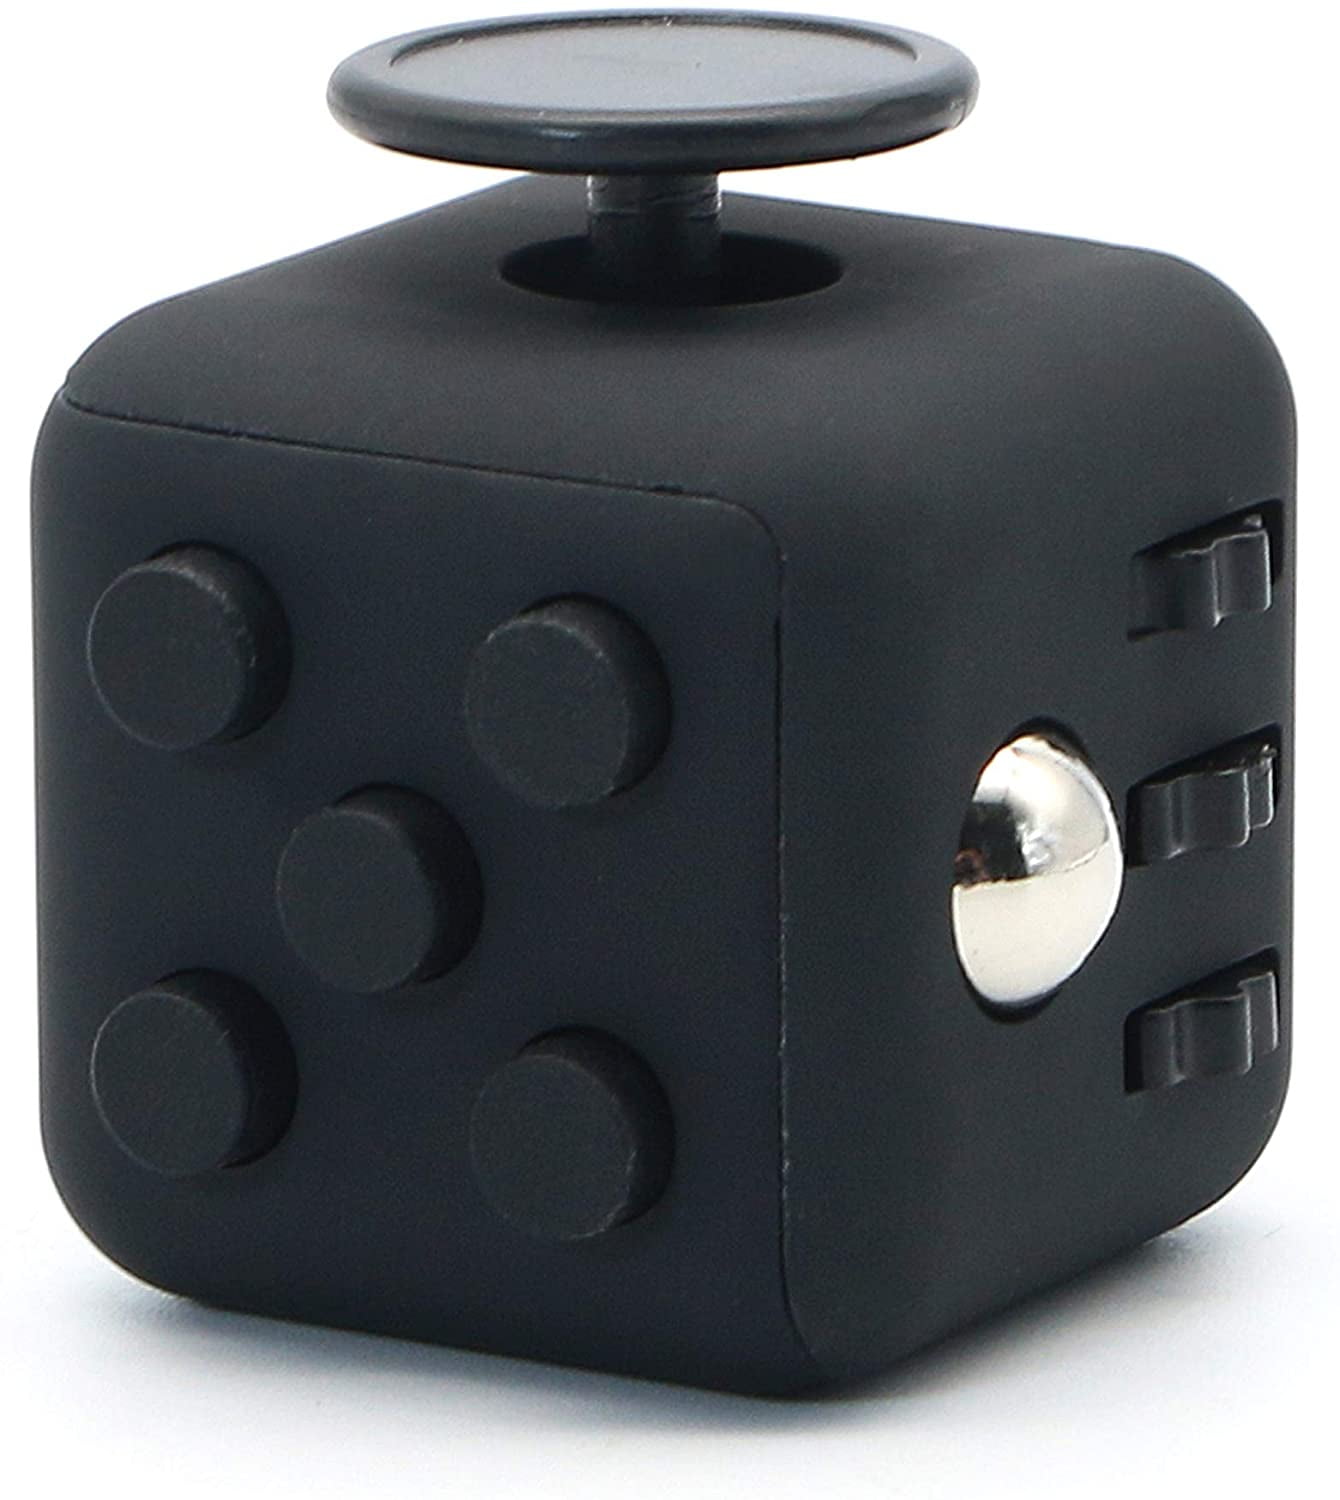 Fidget Cube Anxiety Stress Relief Focus 6-side Calm Funny Finger Toy Black Red 